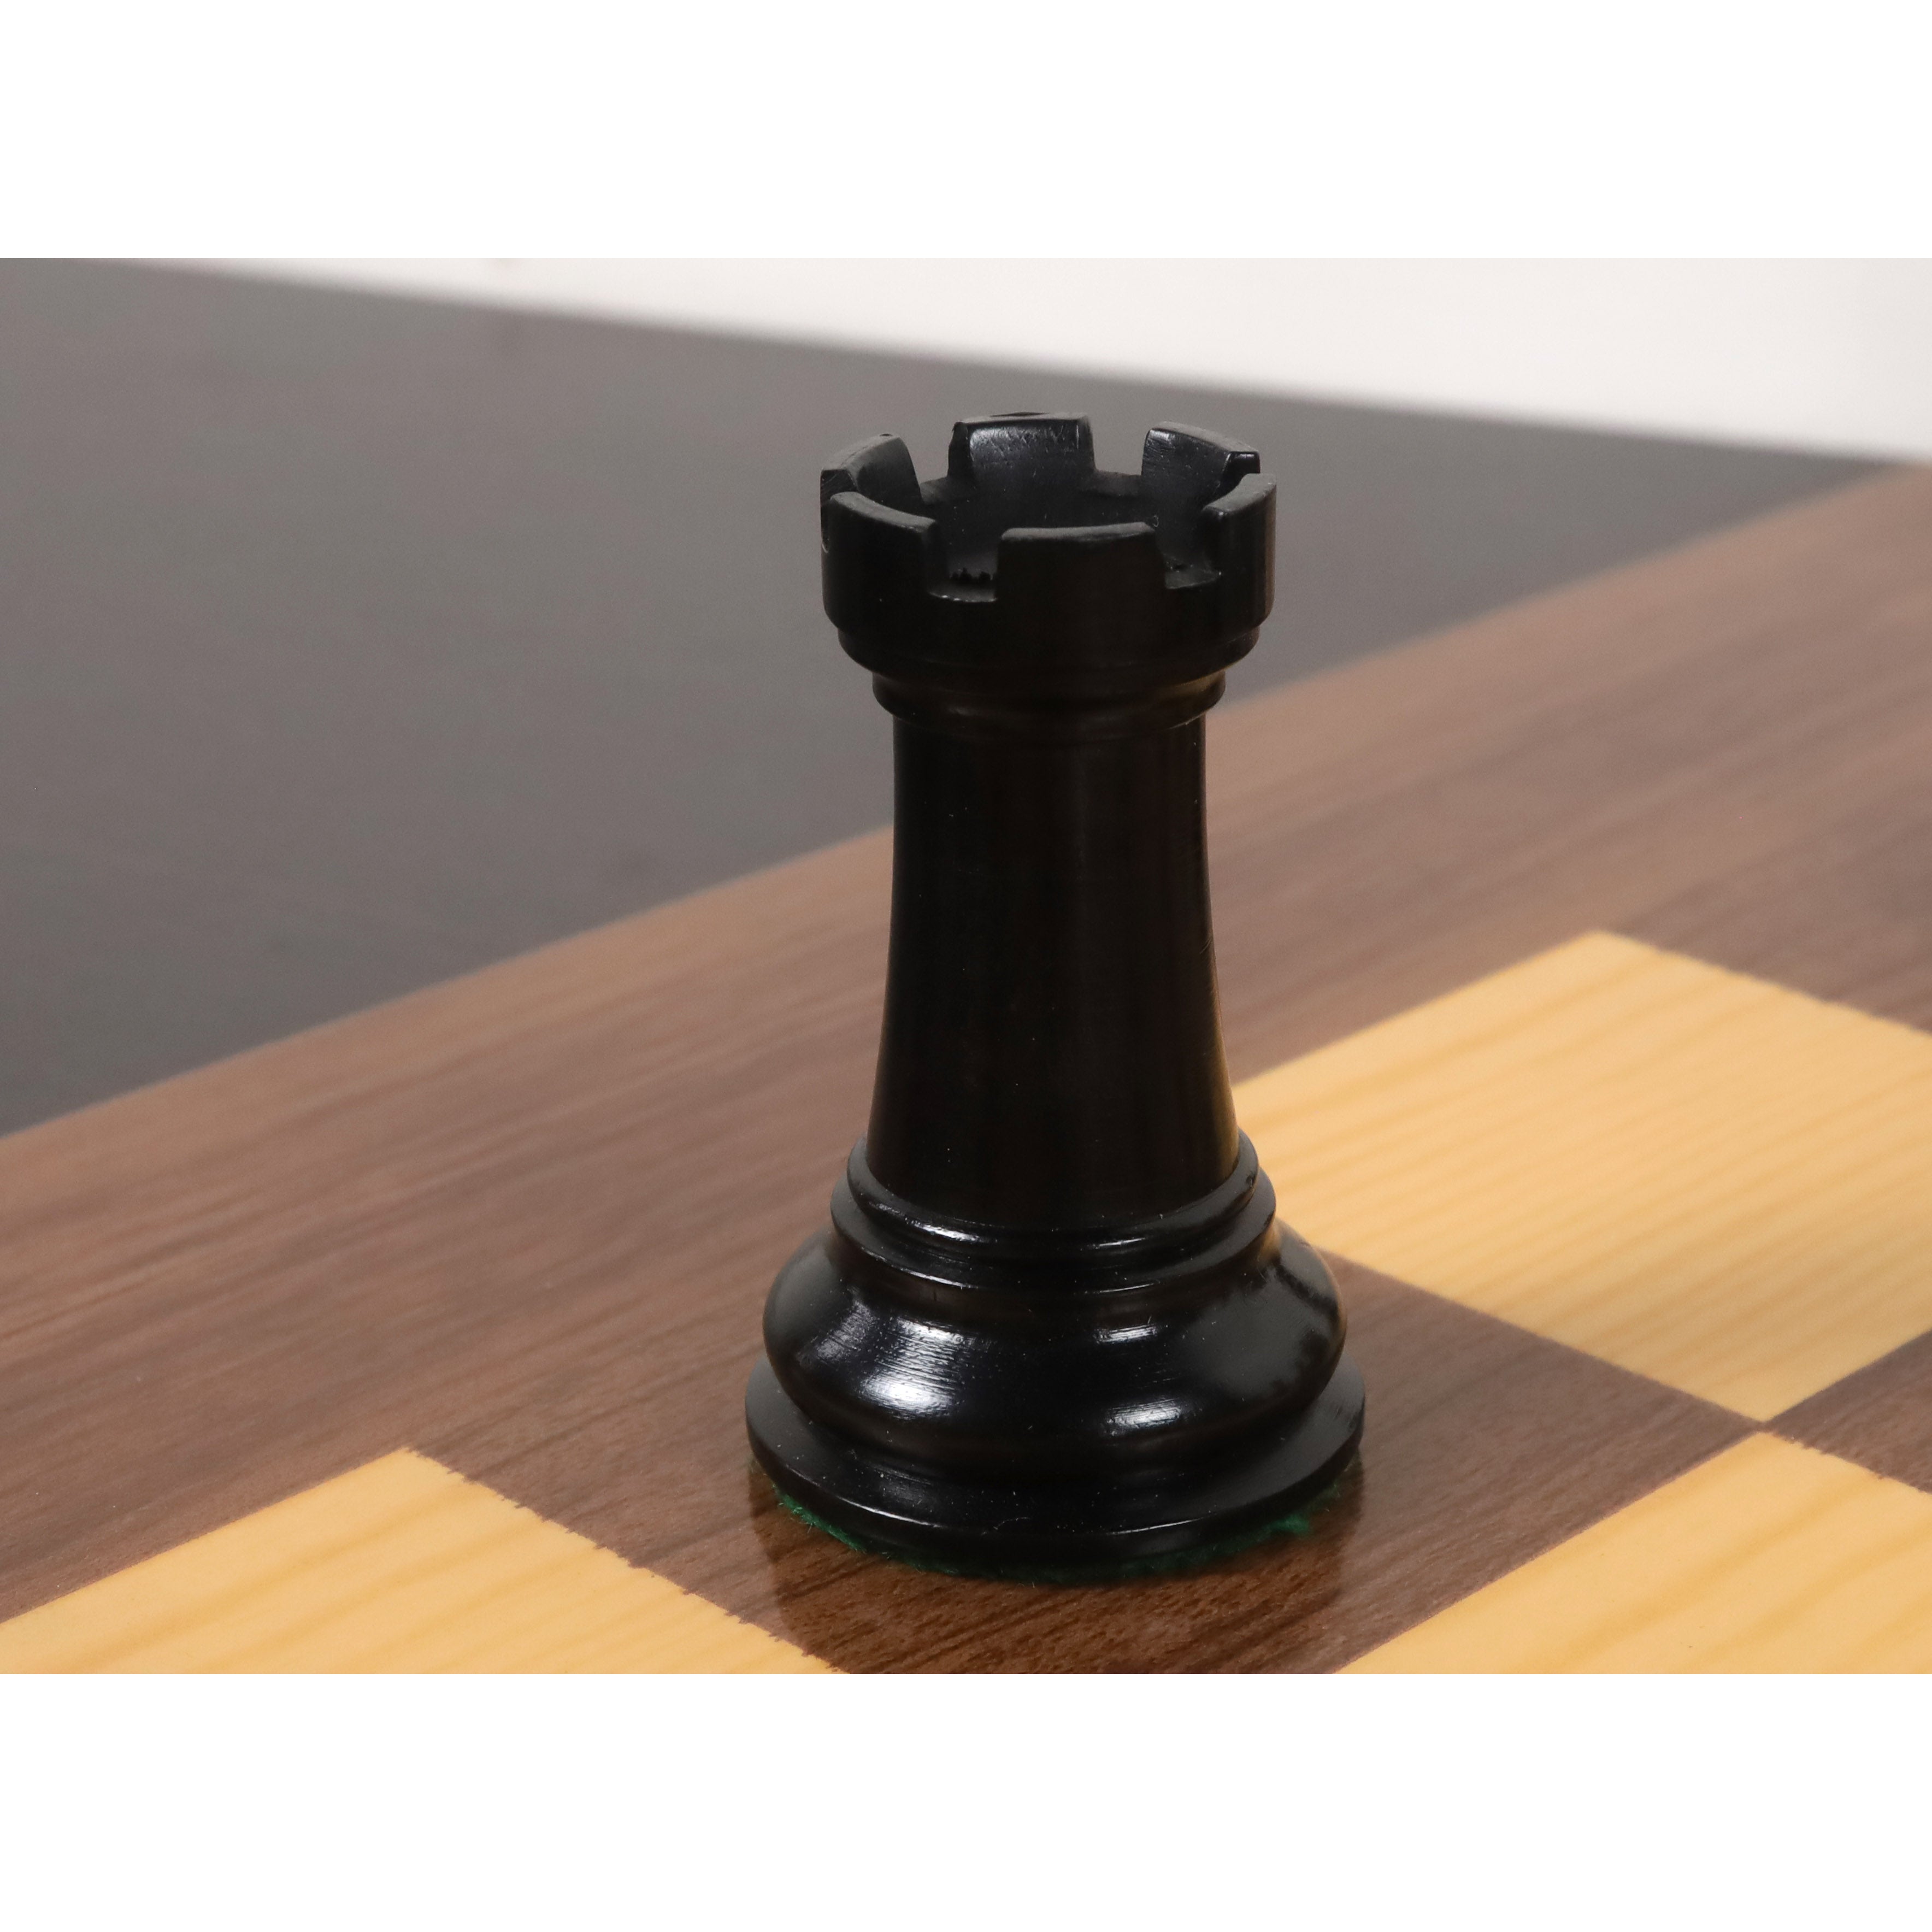 Slightly Imperfect 2021 Sinquefield Cup Reproduced Staunton Chess Pieces Only set - Triple weighted Ebony Wood